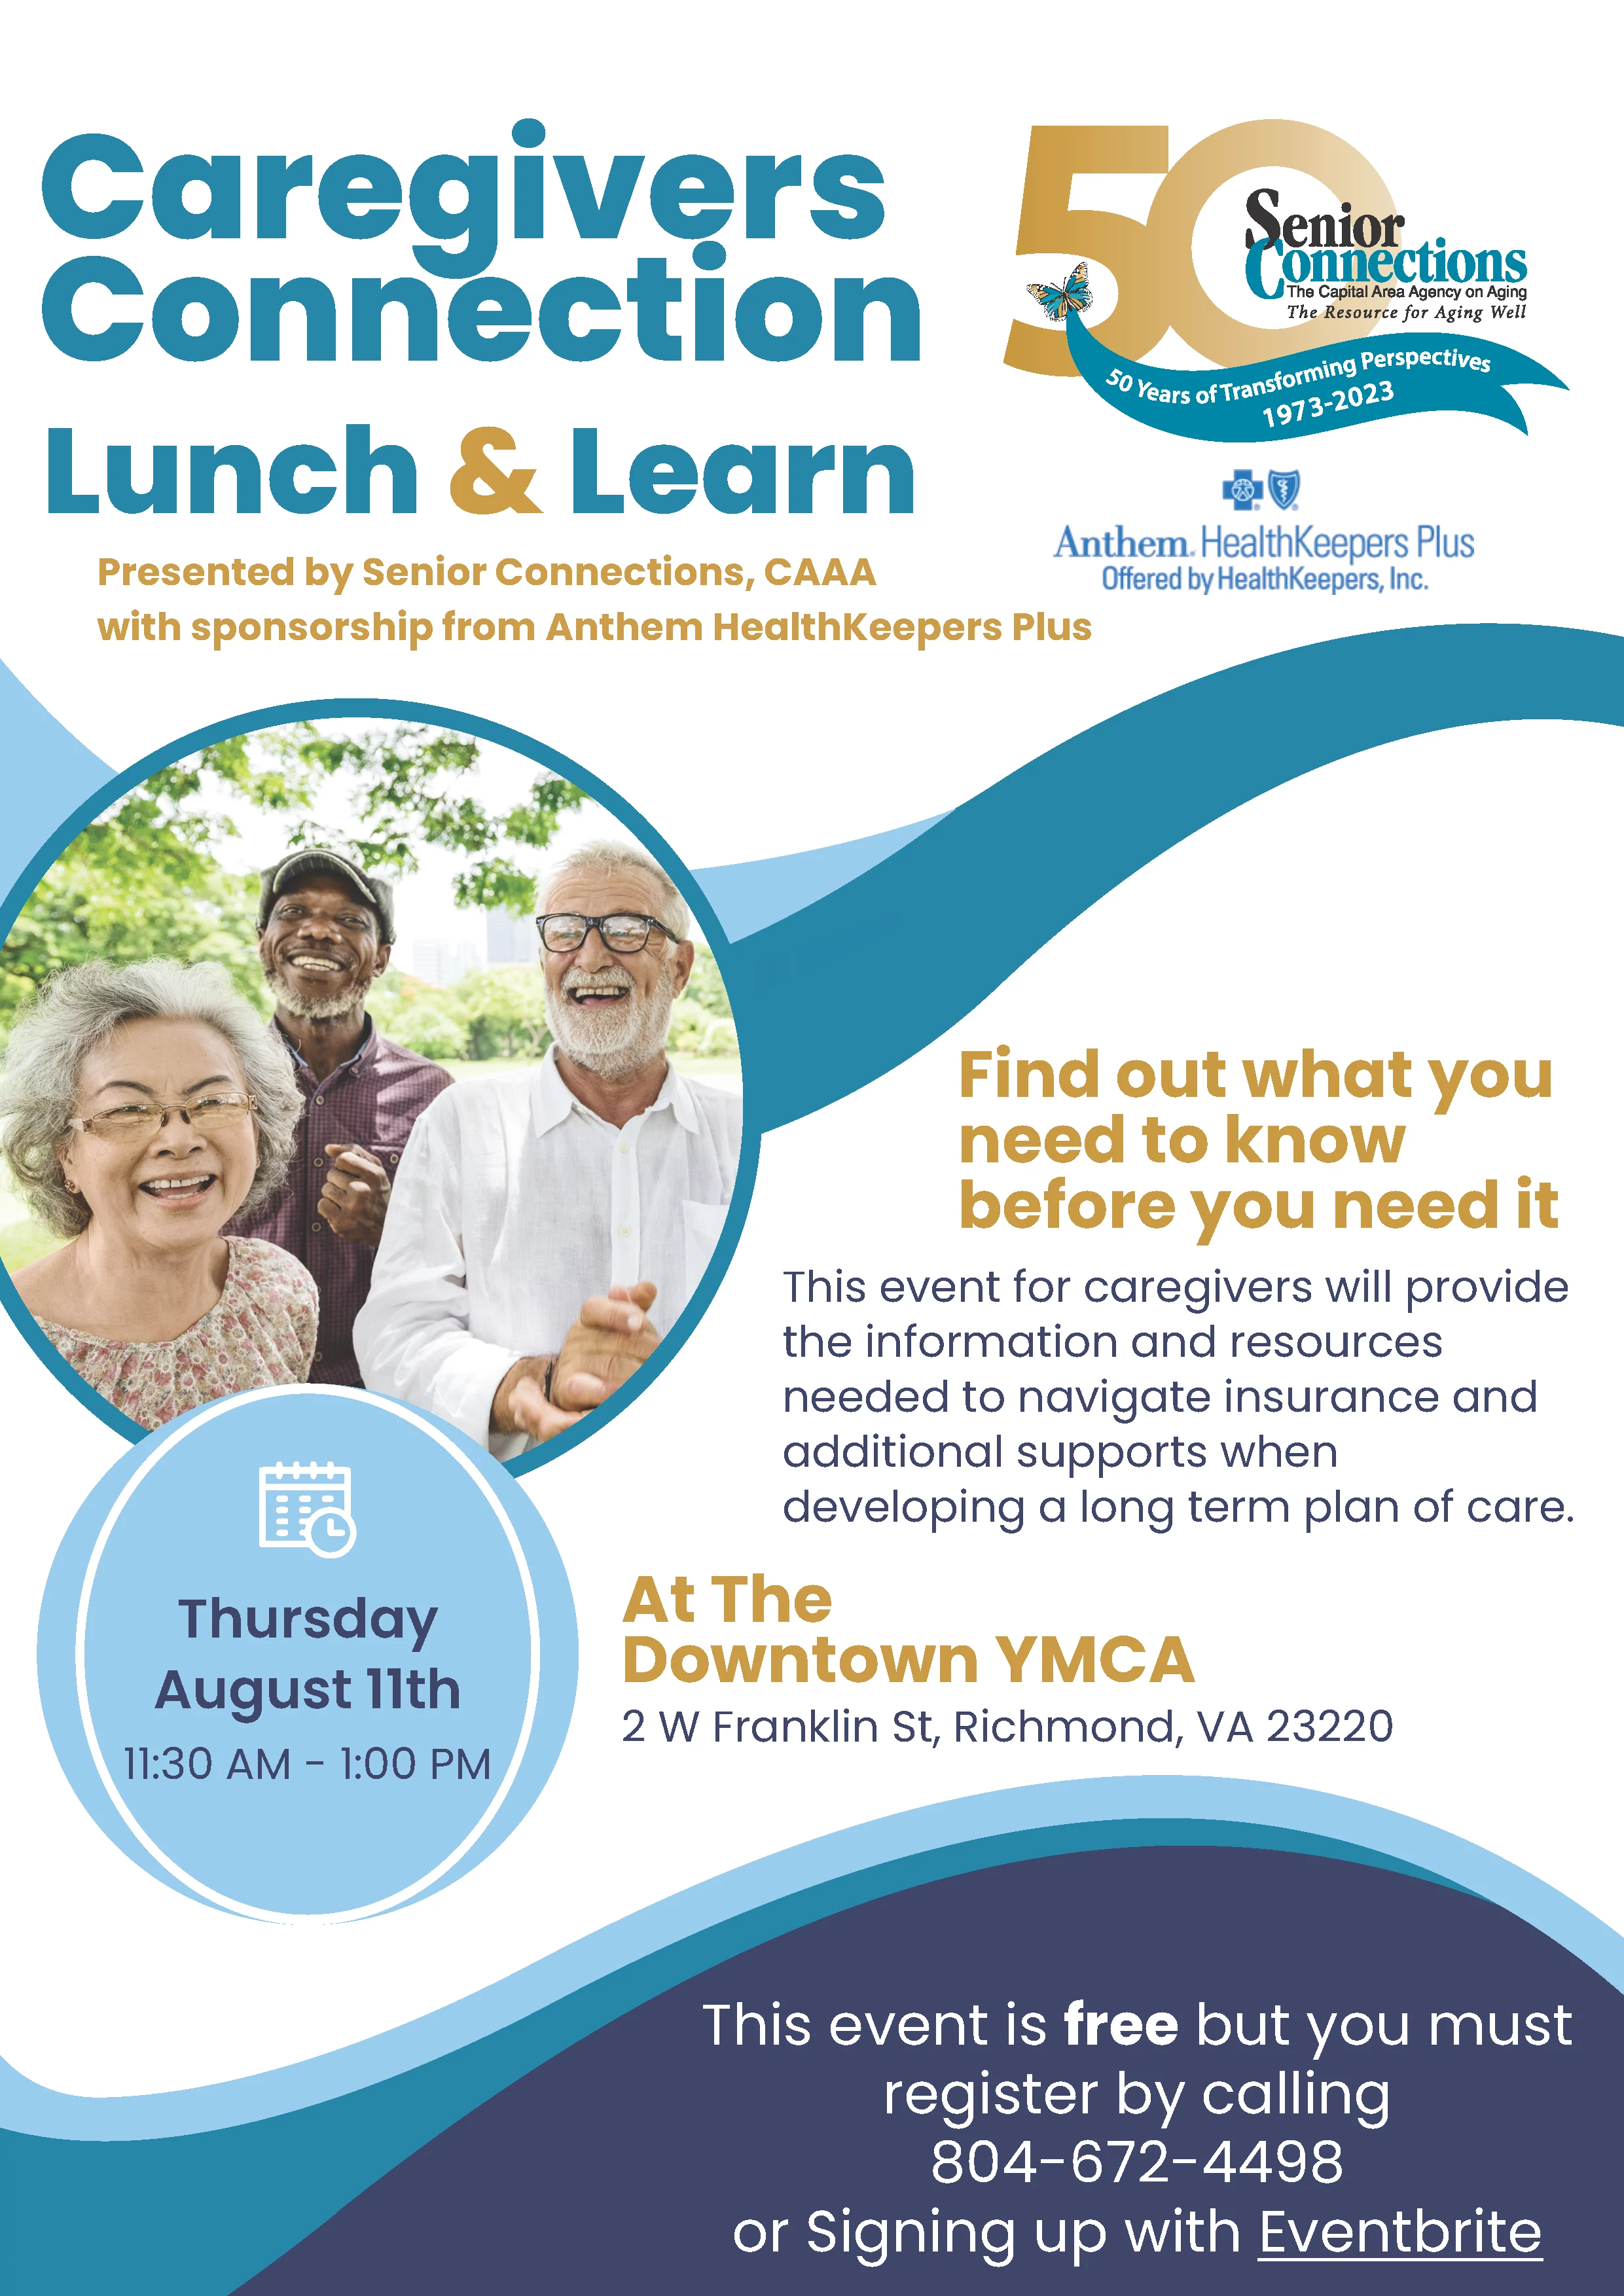 Caregivers Connection on August 11th at 11:30am-1pm at Downtown YMCA